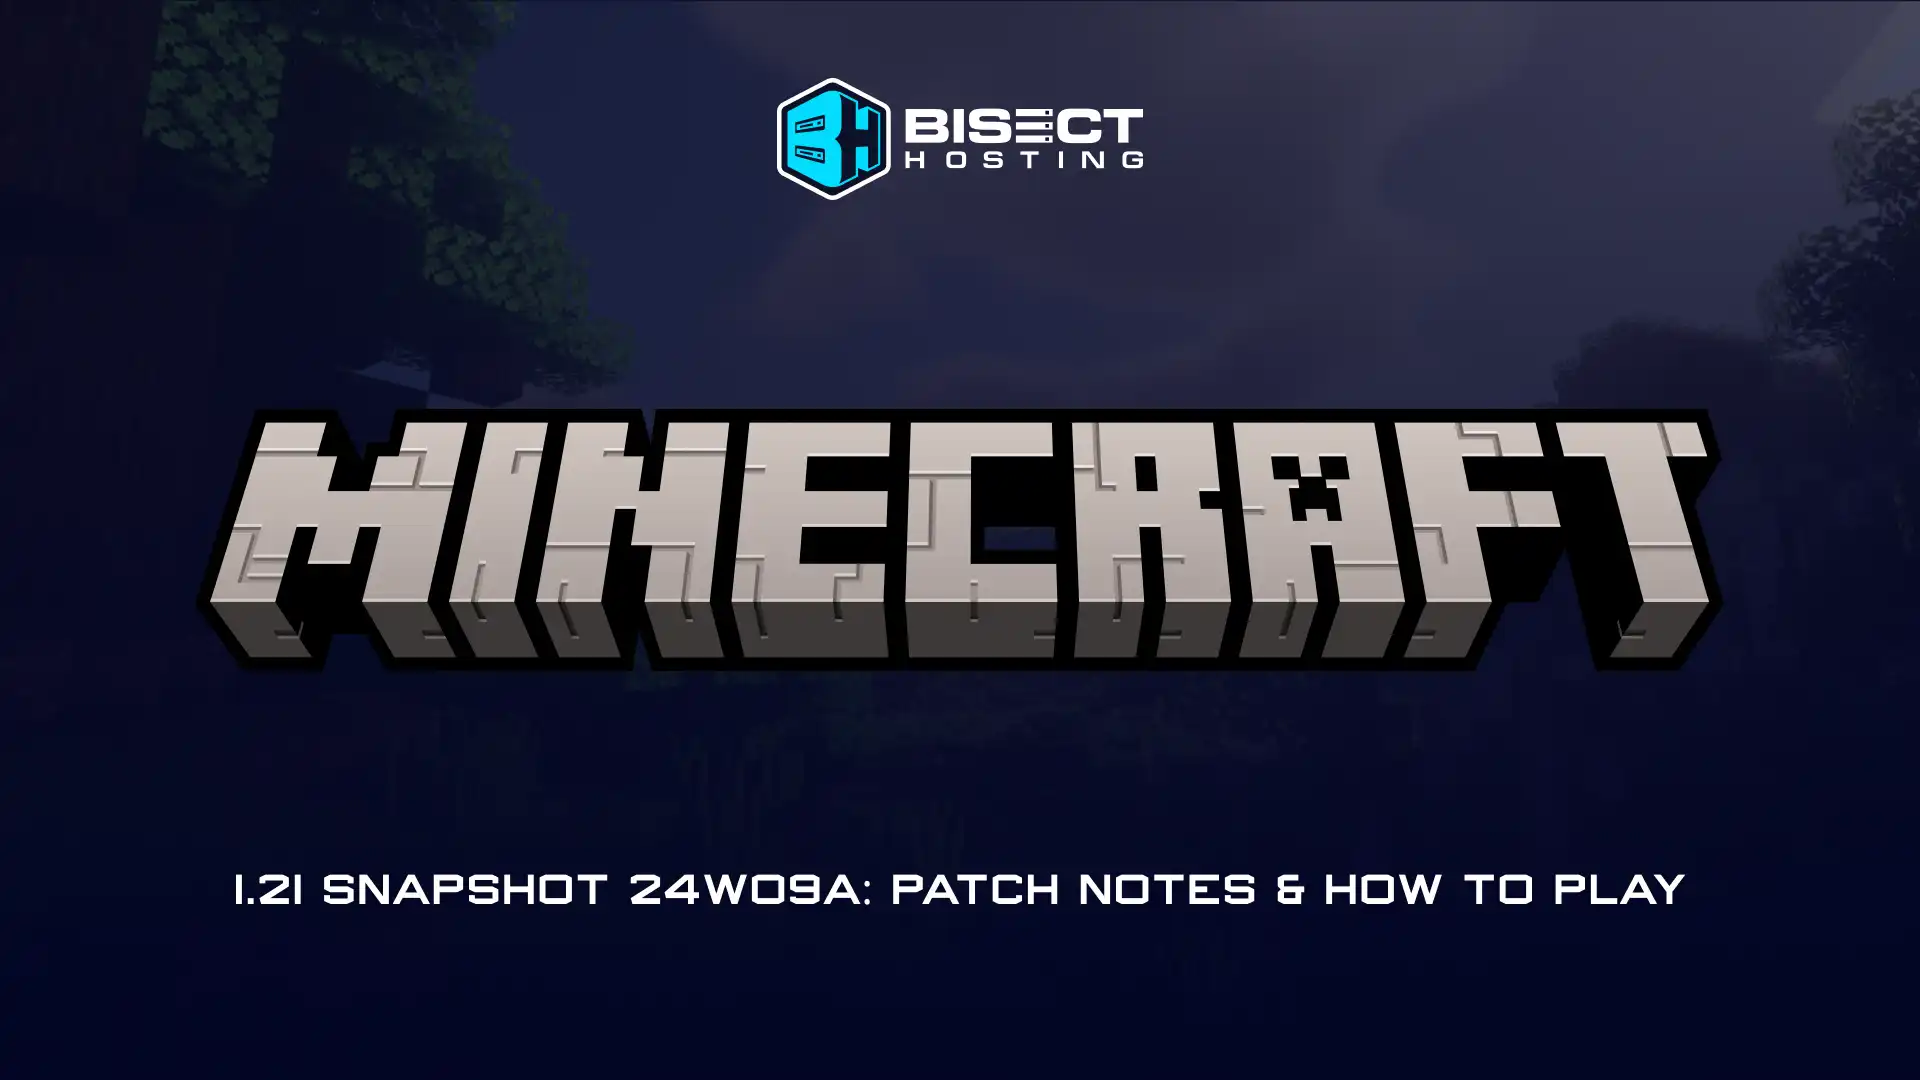 Minecraft 1.21 Snapshot 24W09A: Patch Notes & How to Play